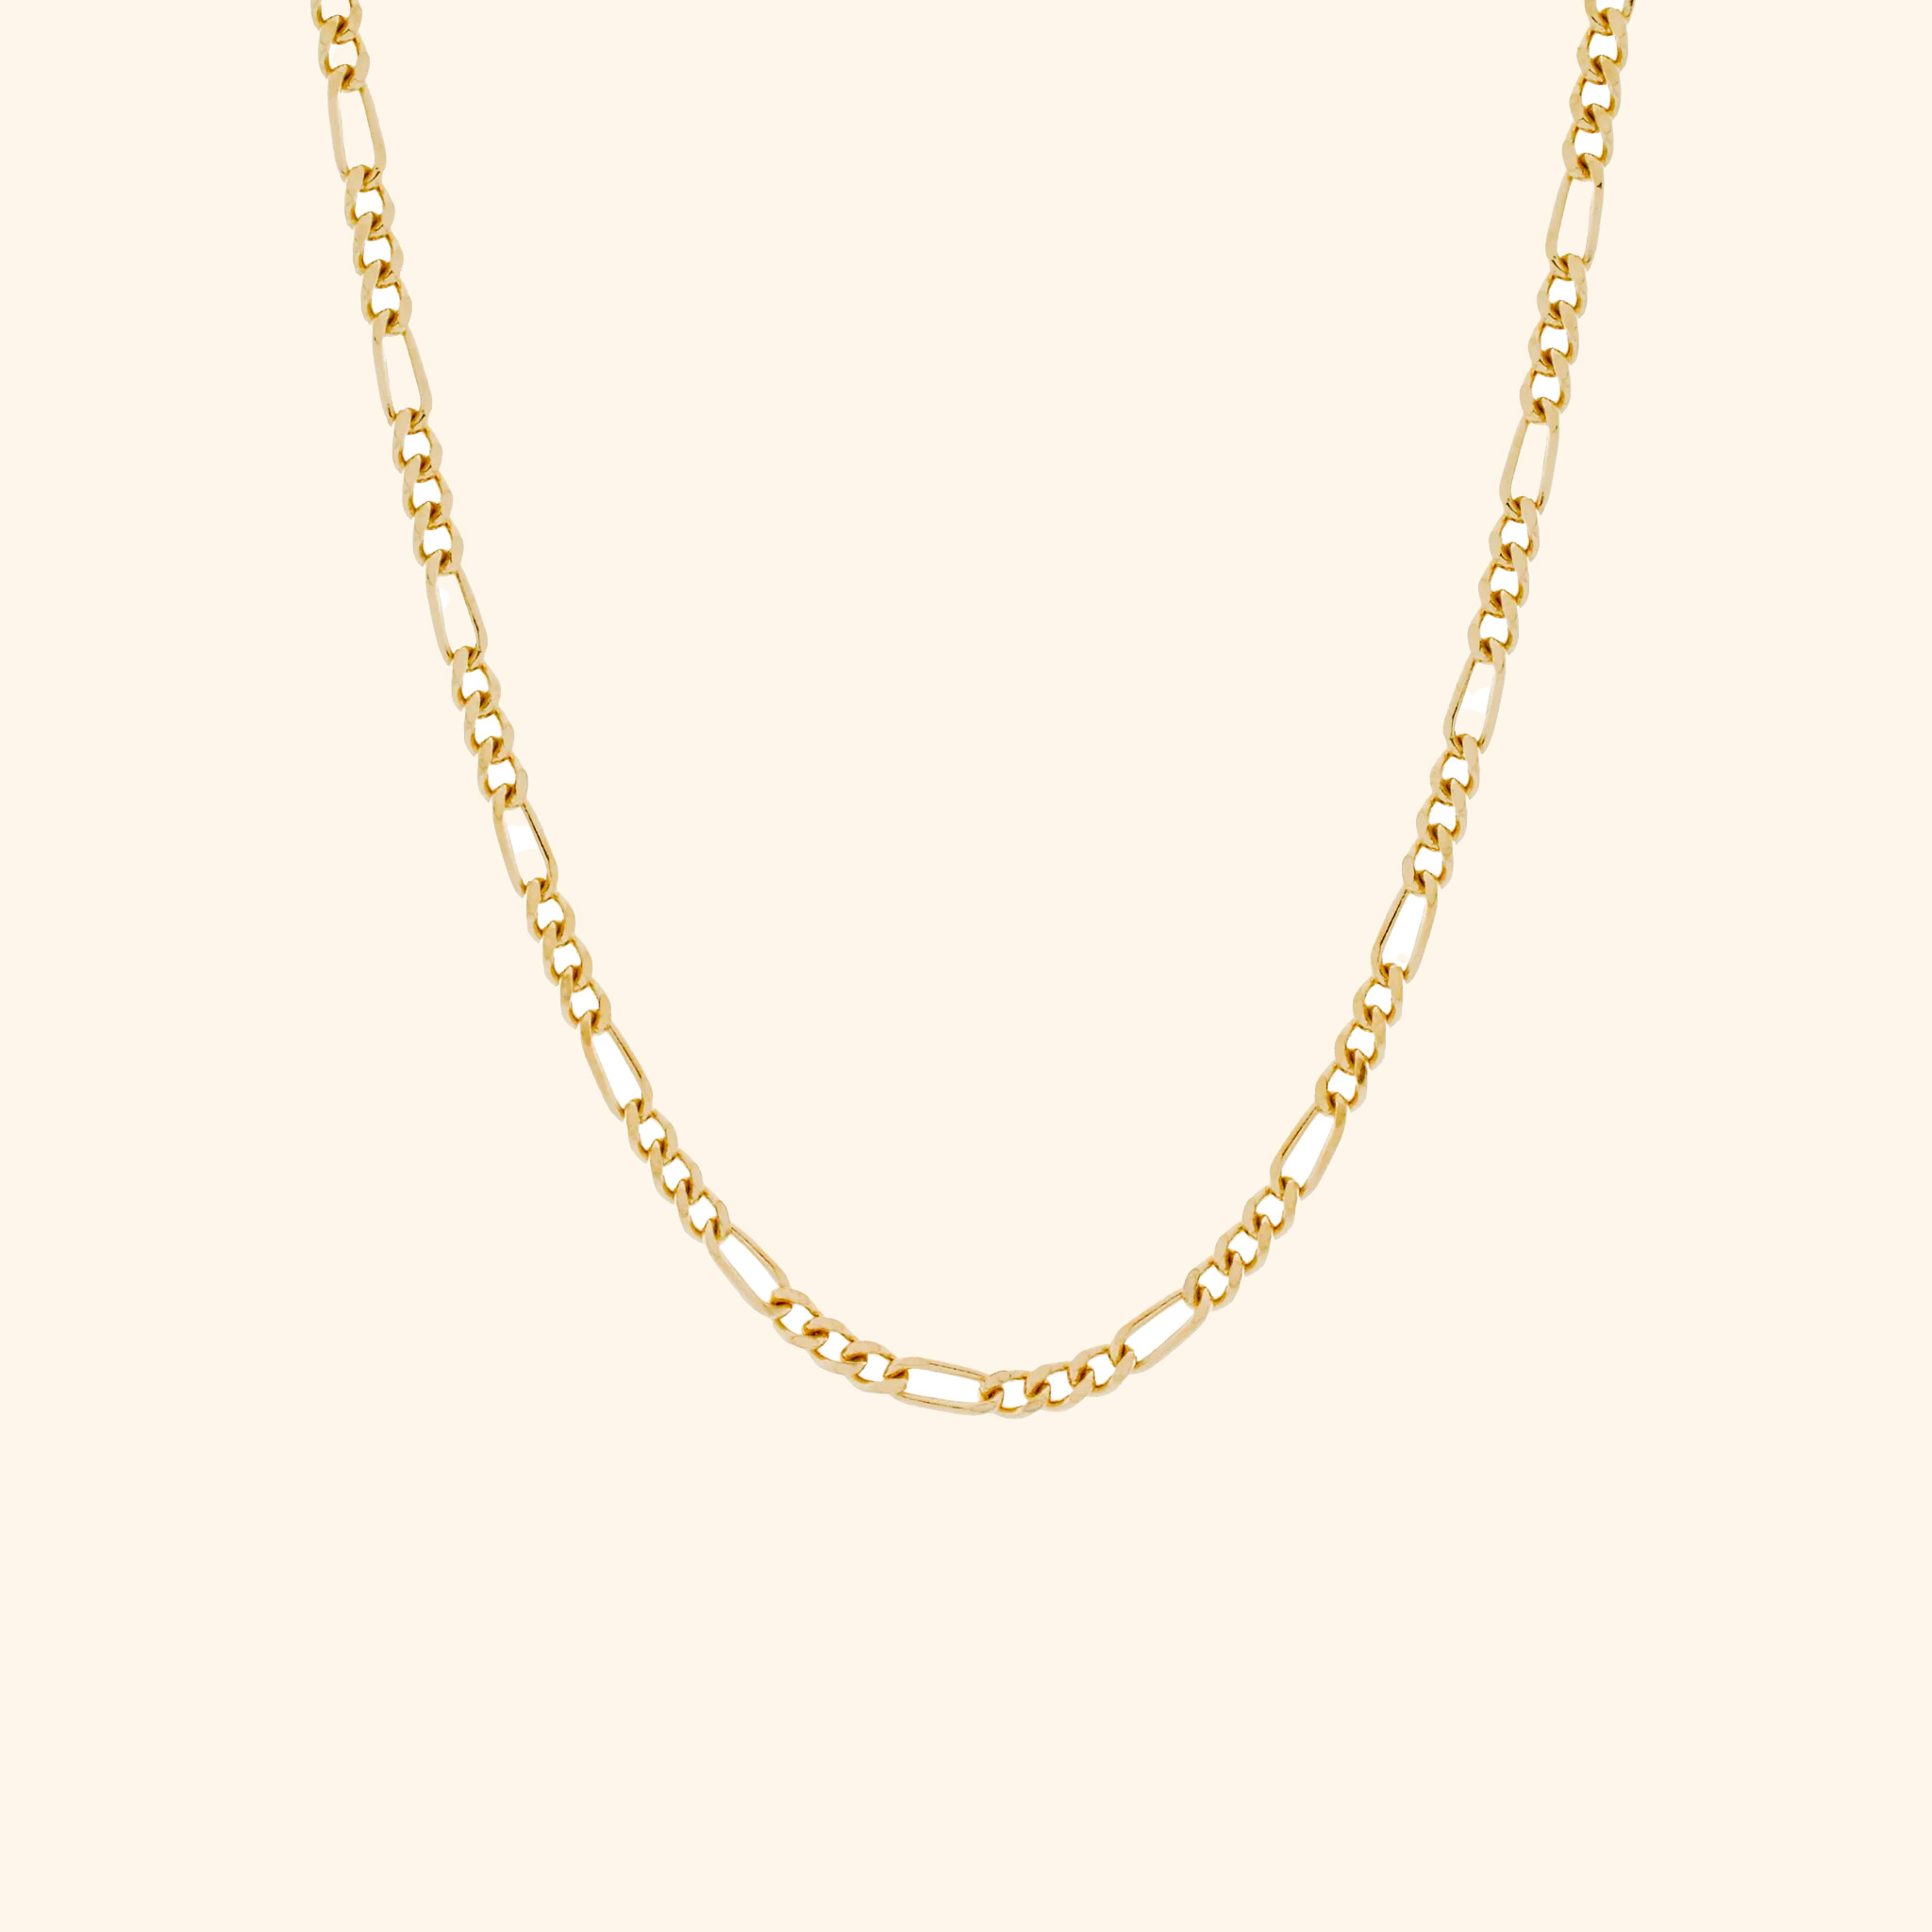 A chain from Monarc Jewellry